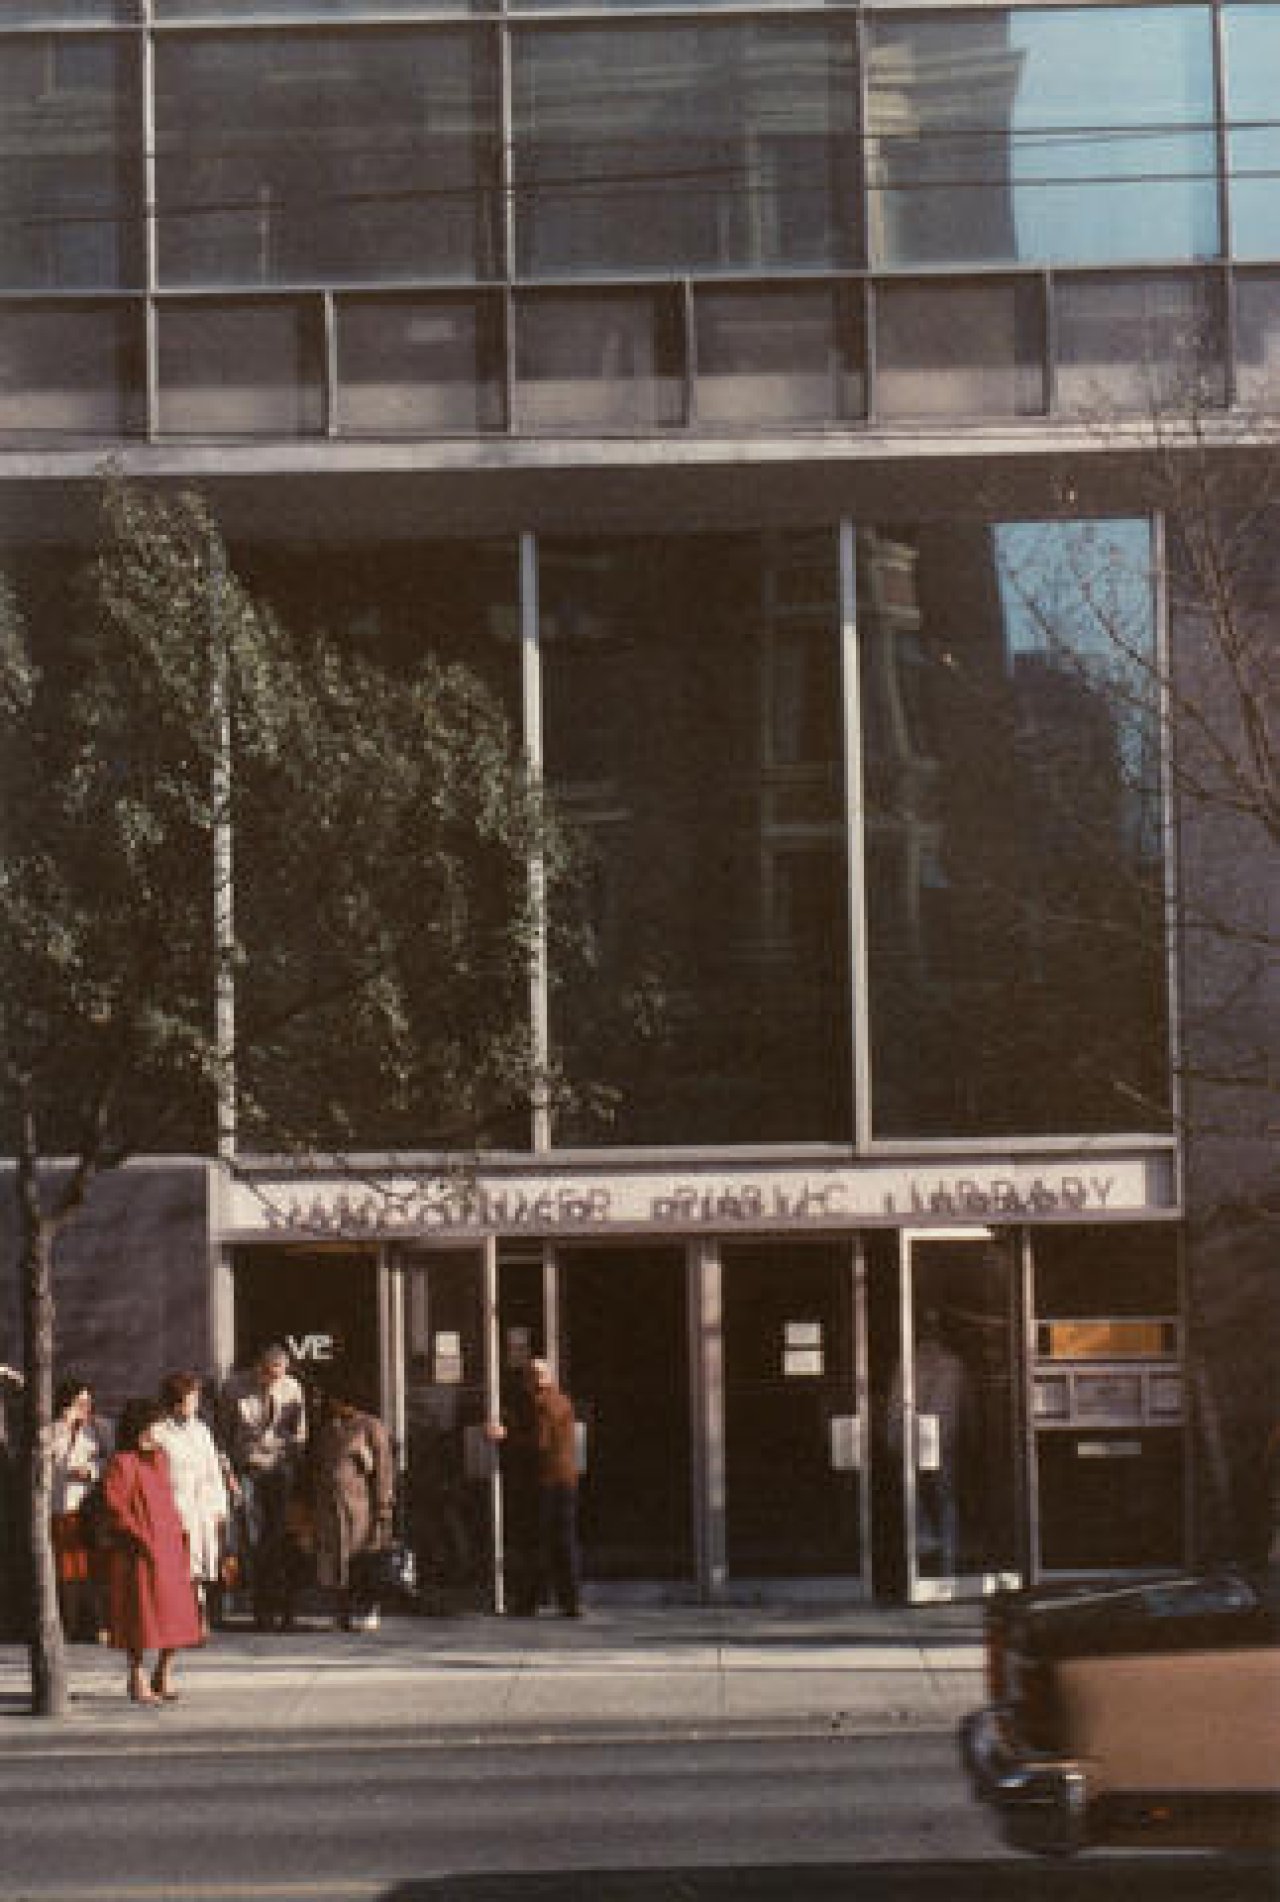 Exterior front of former Vancouver Public Library, 1984. City of Vancouver Archives 2011-010.108.